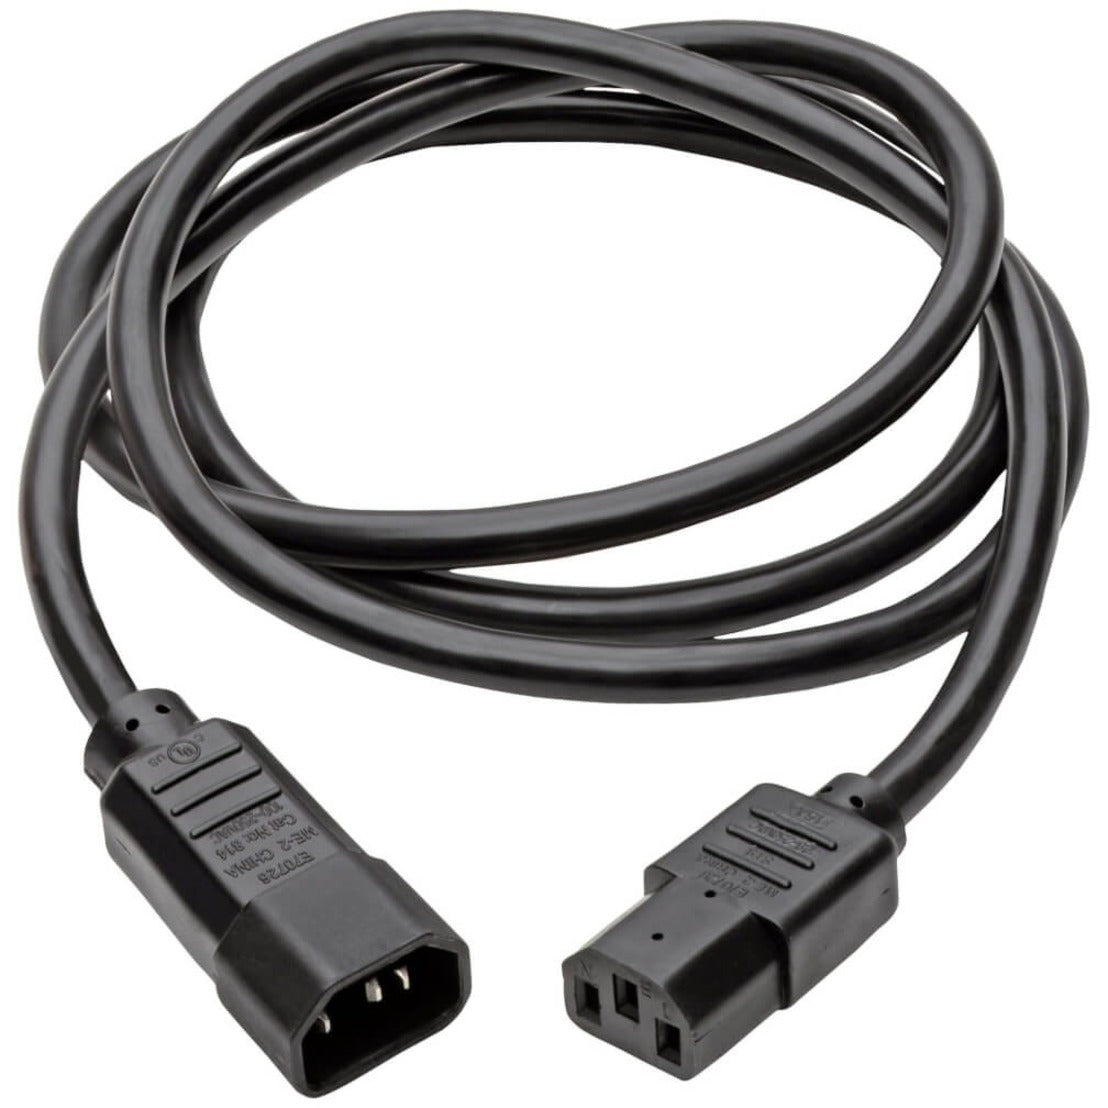 Tripp Lite P005-006 Power Interconnect Cable, 6 ft, 14 AWG, 15A, 250V AC